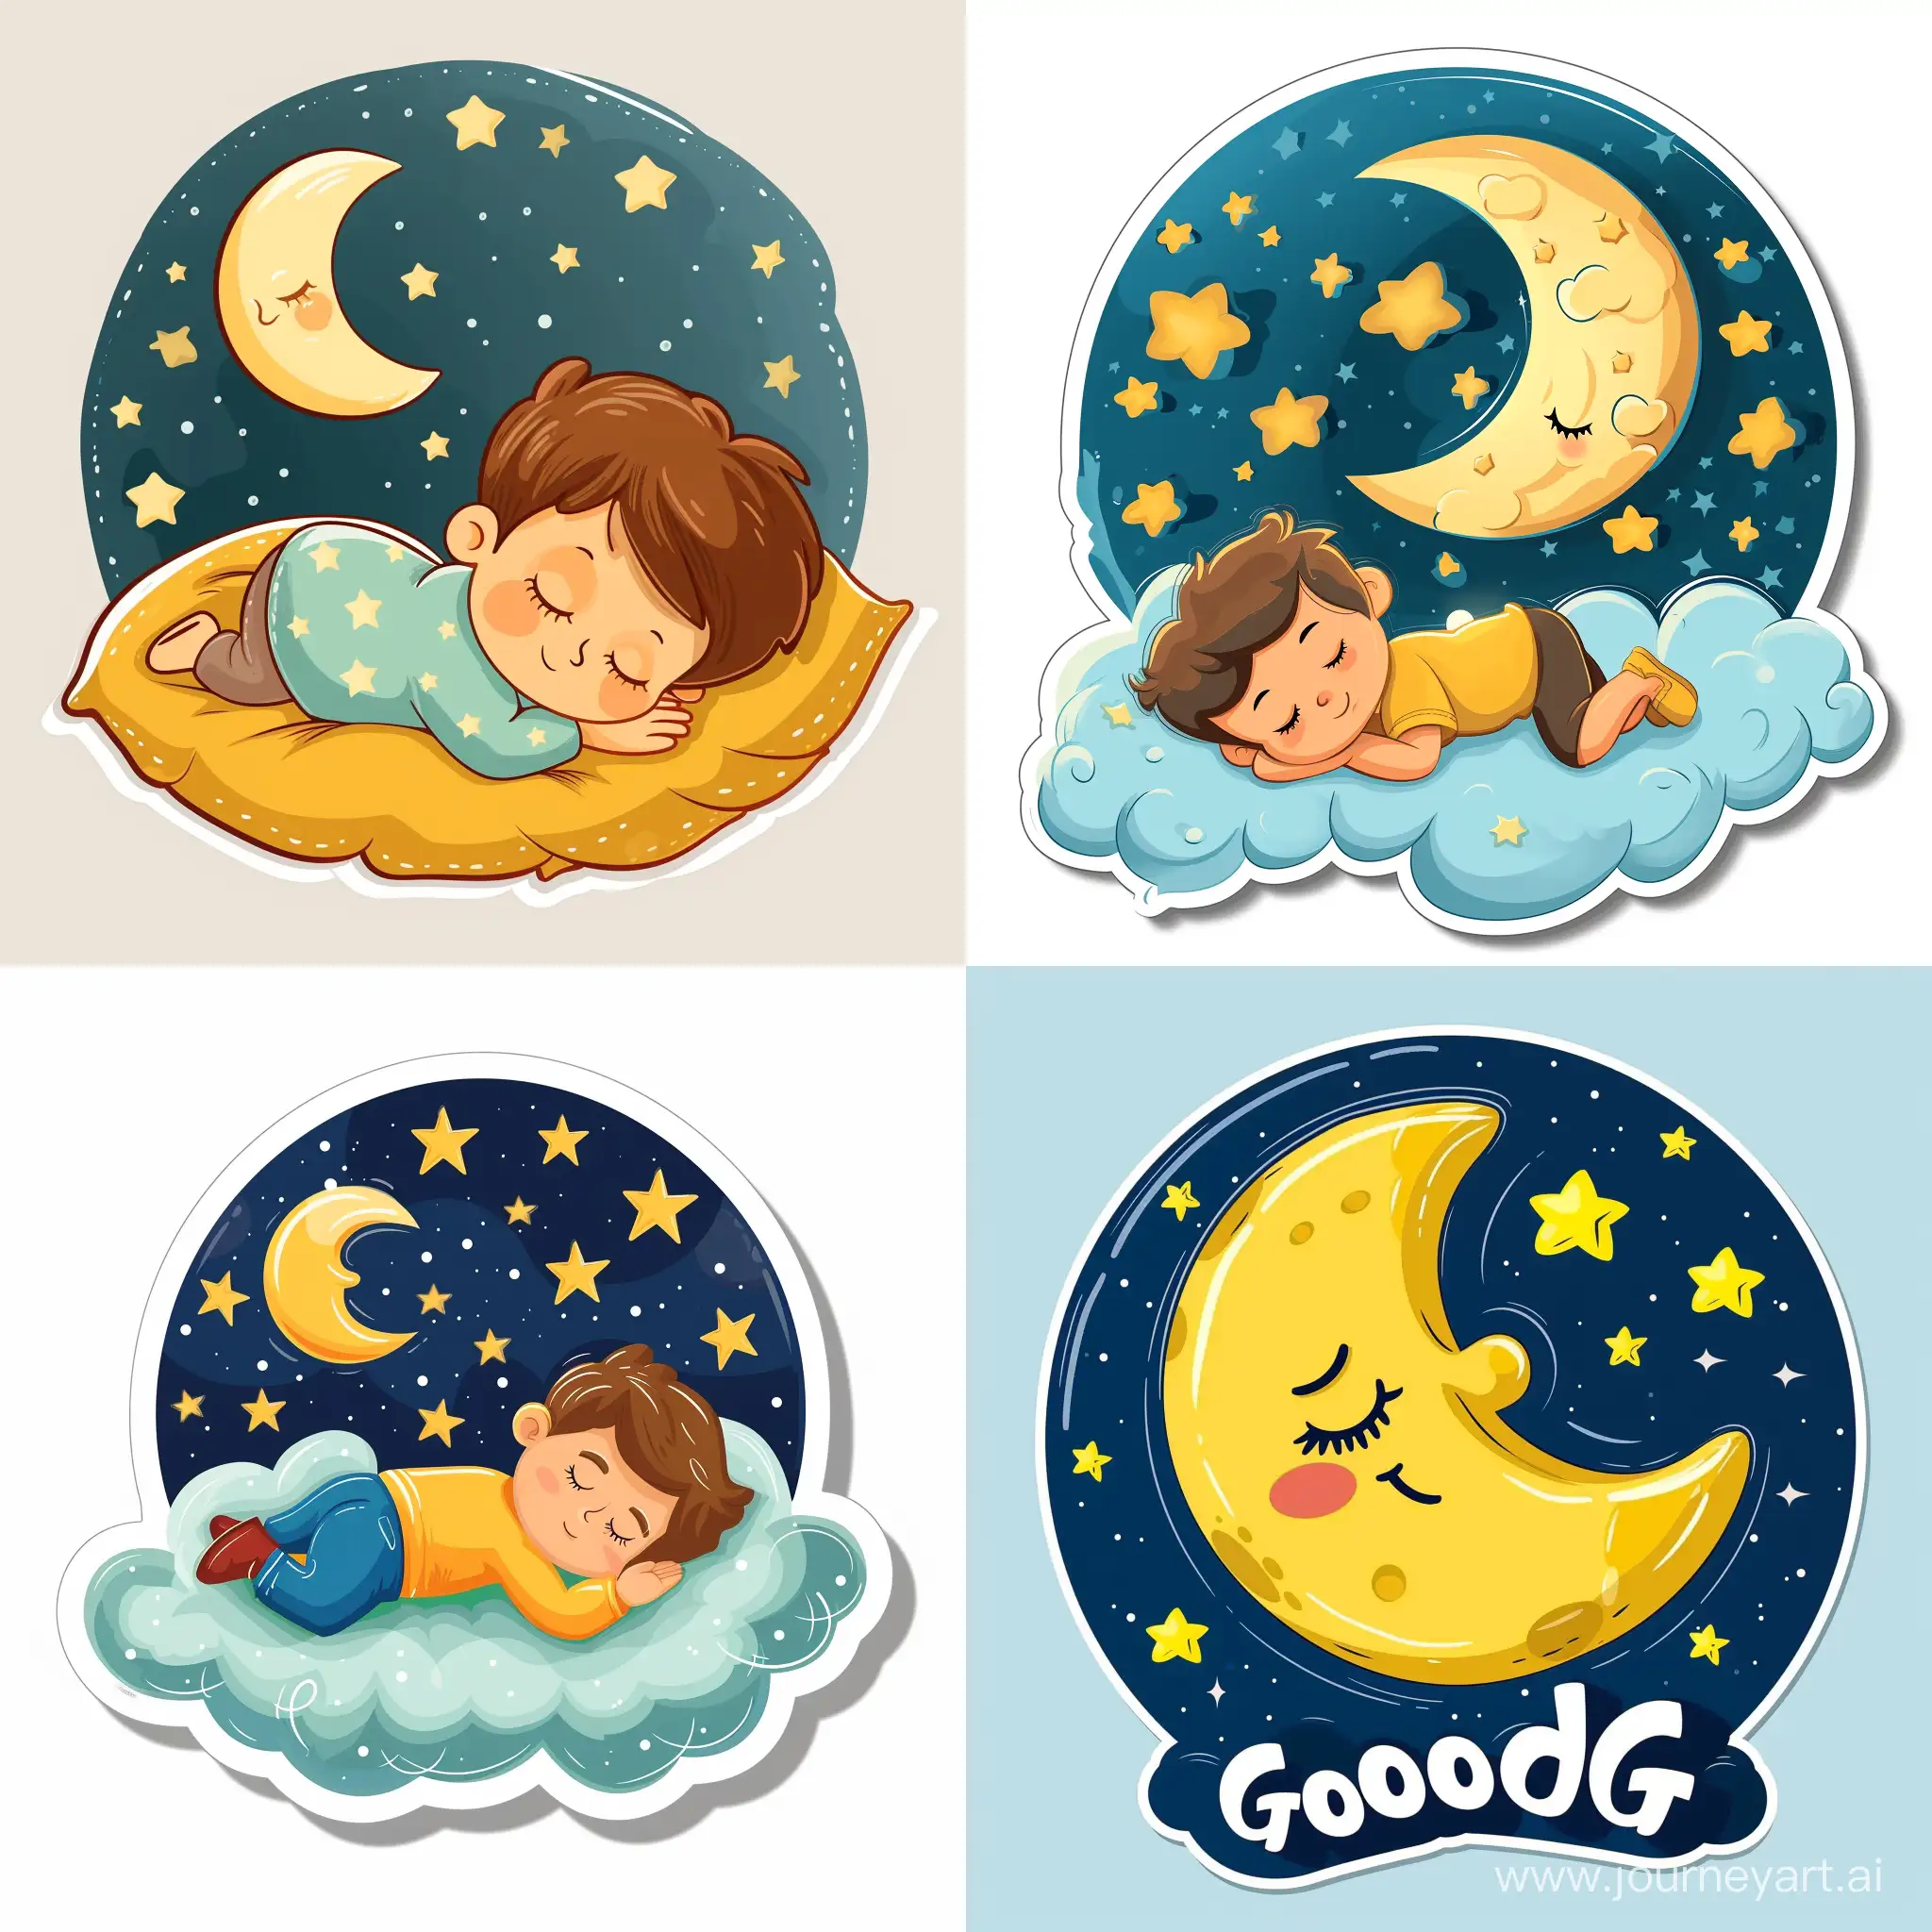 Adorable-Cartoon-Sticker-of-a-Good-Night-Scene-in-Vector-Style